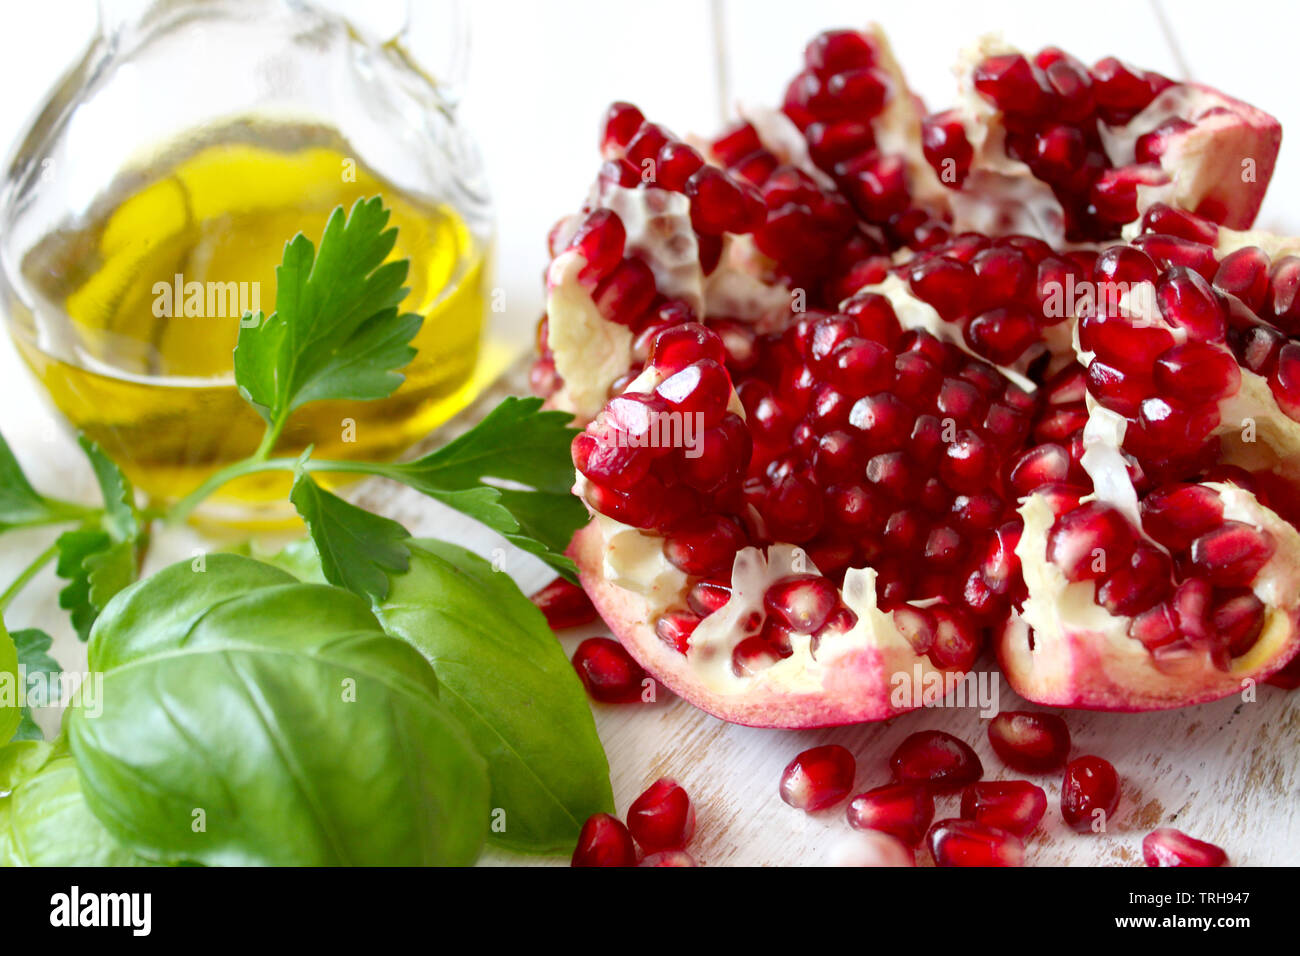 Juicy pomegranate fruit on white background. Top view. Diet food concept. Stock Photo